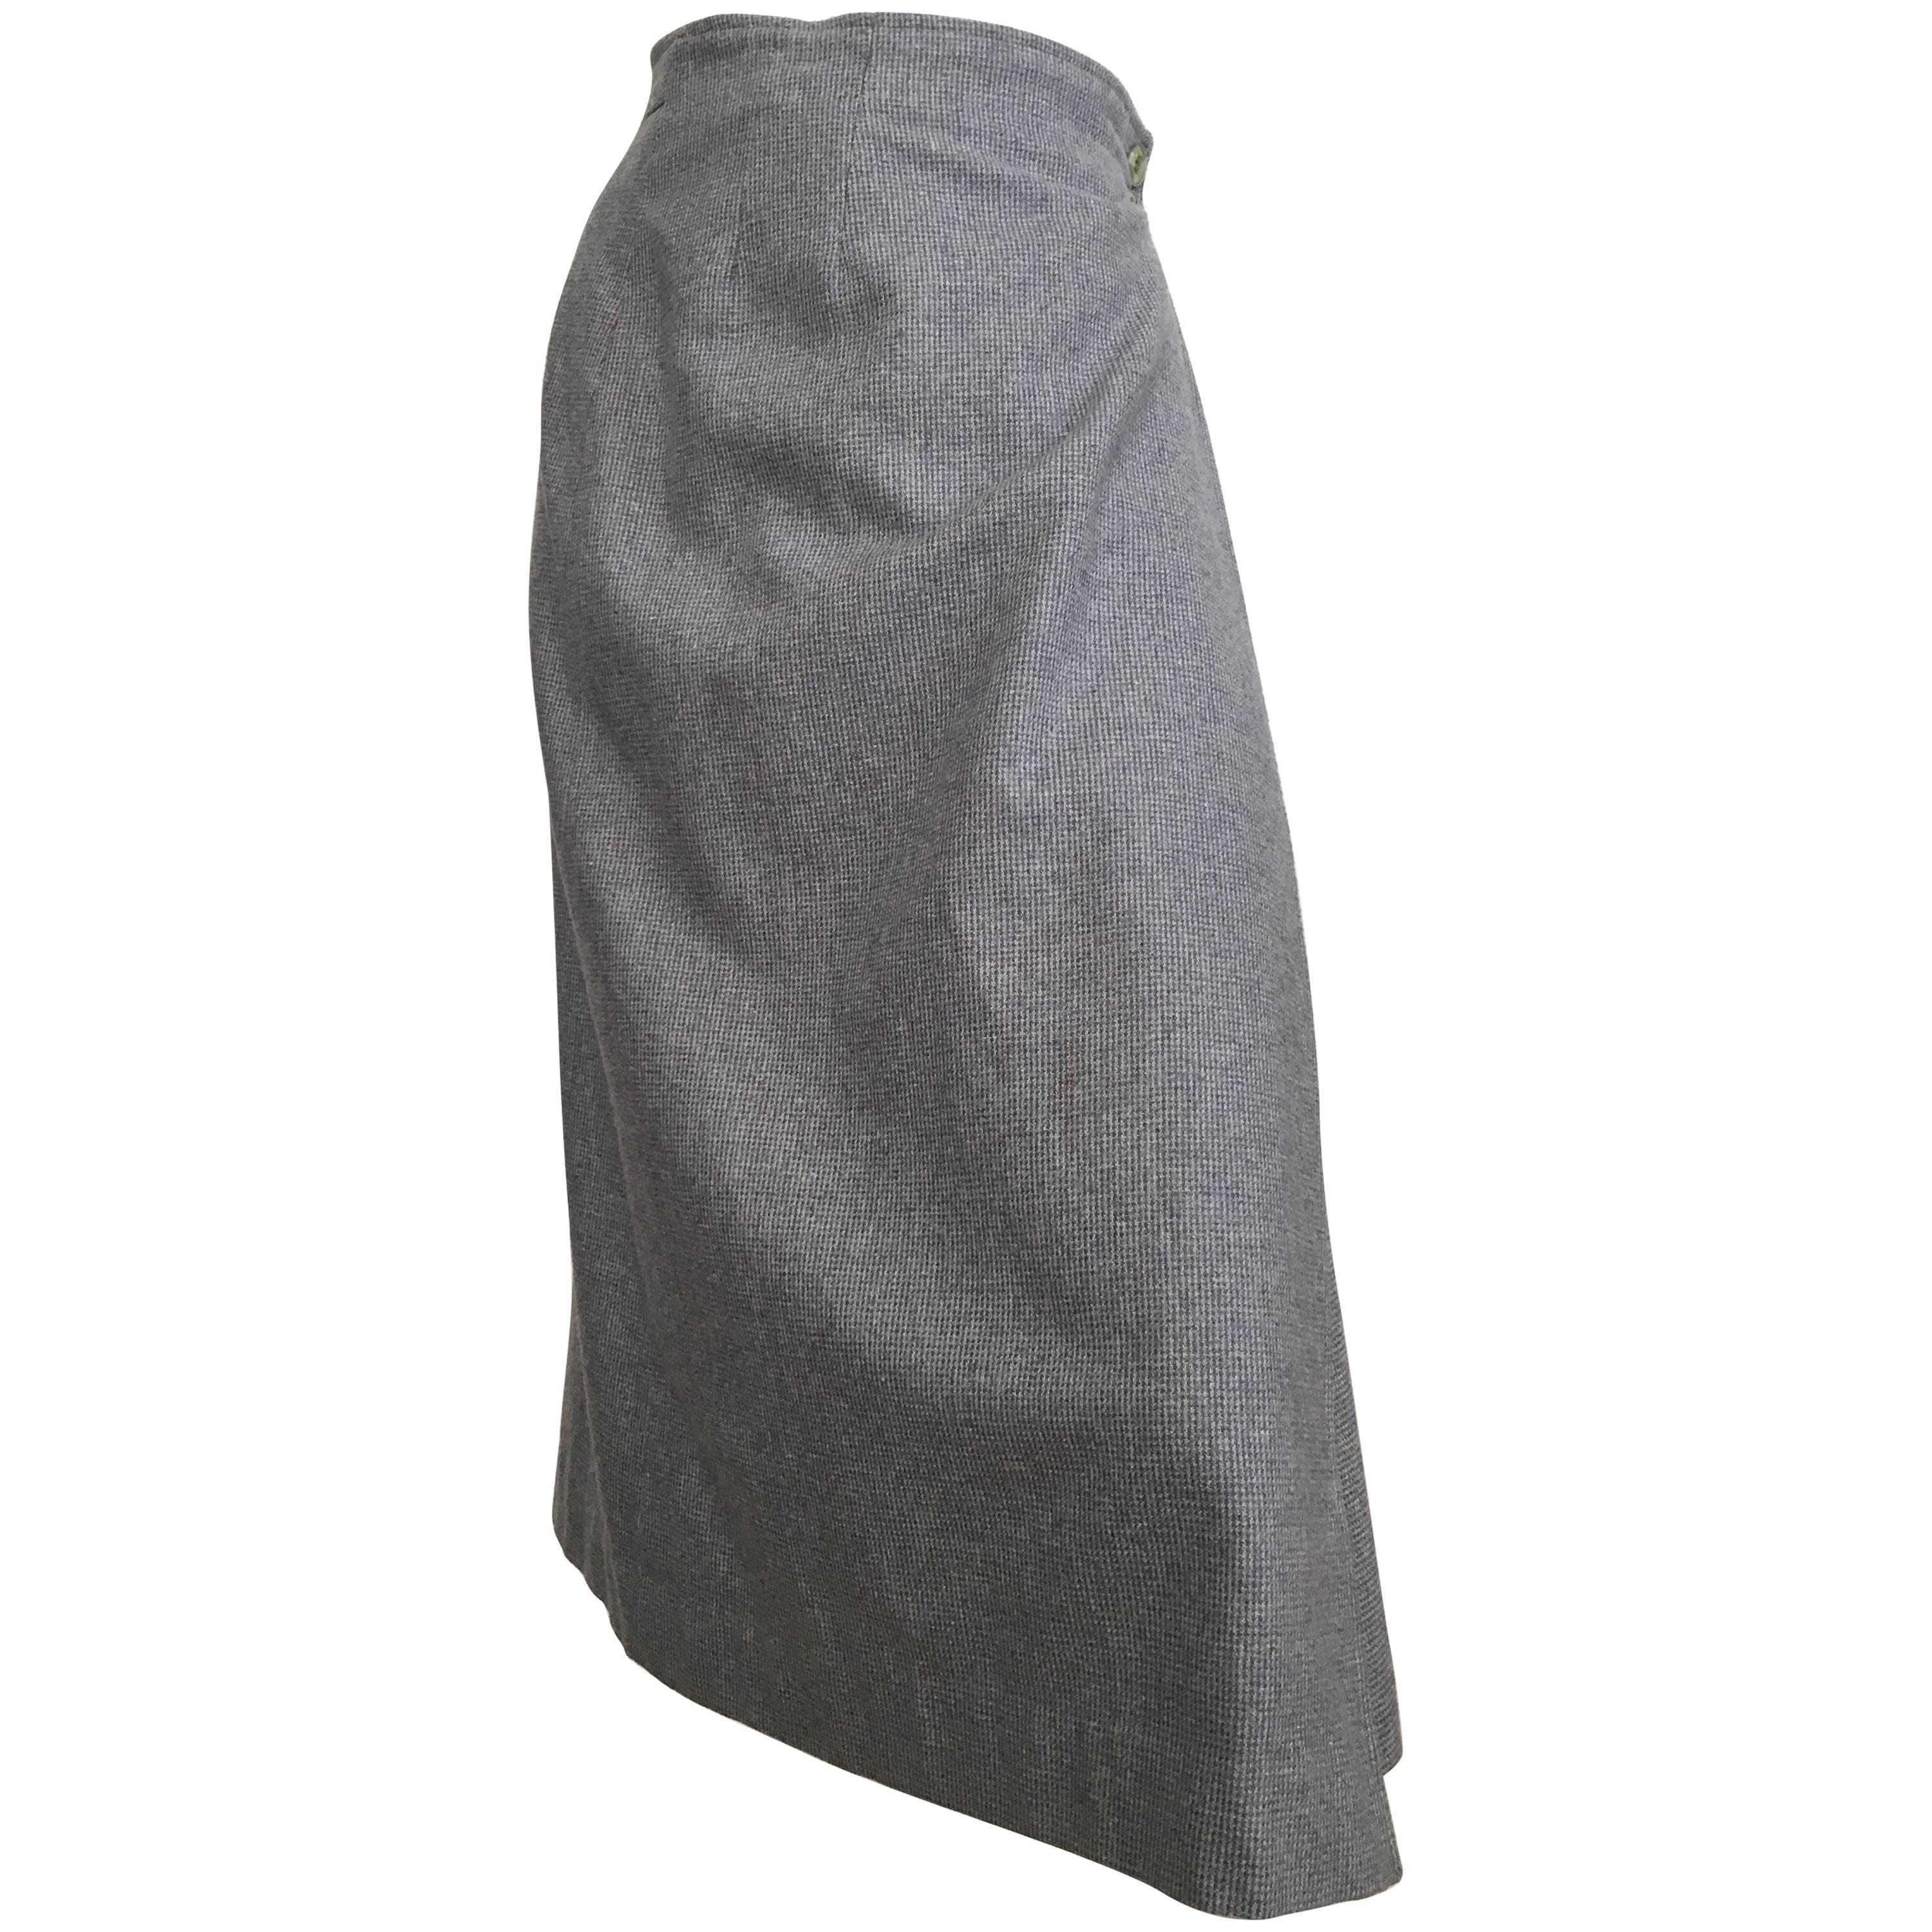 Intuitions by Maurice Antaya Wool Houndstooth Wrap Skirt Size 4.  For Sale